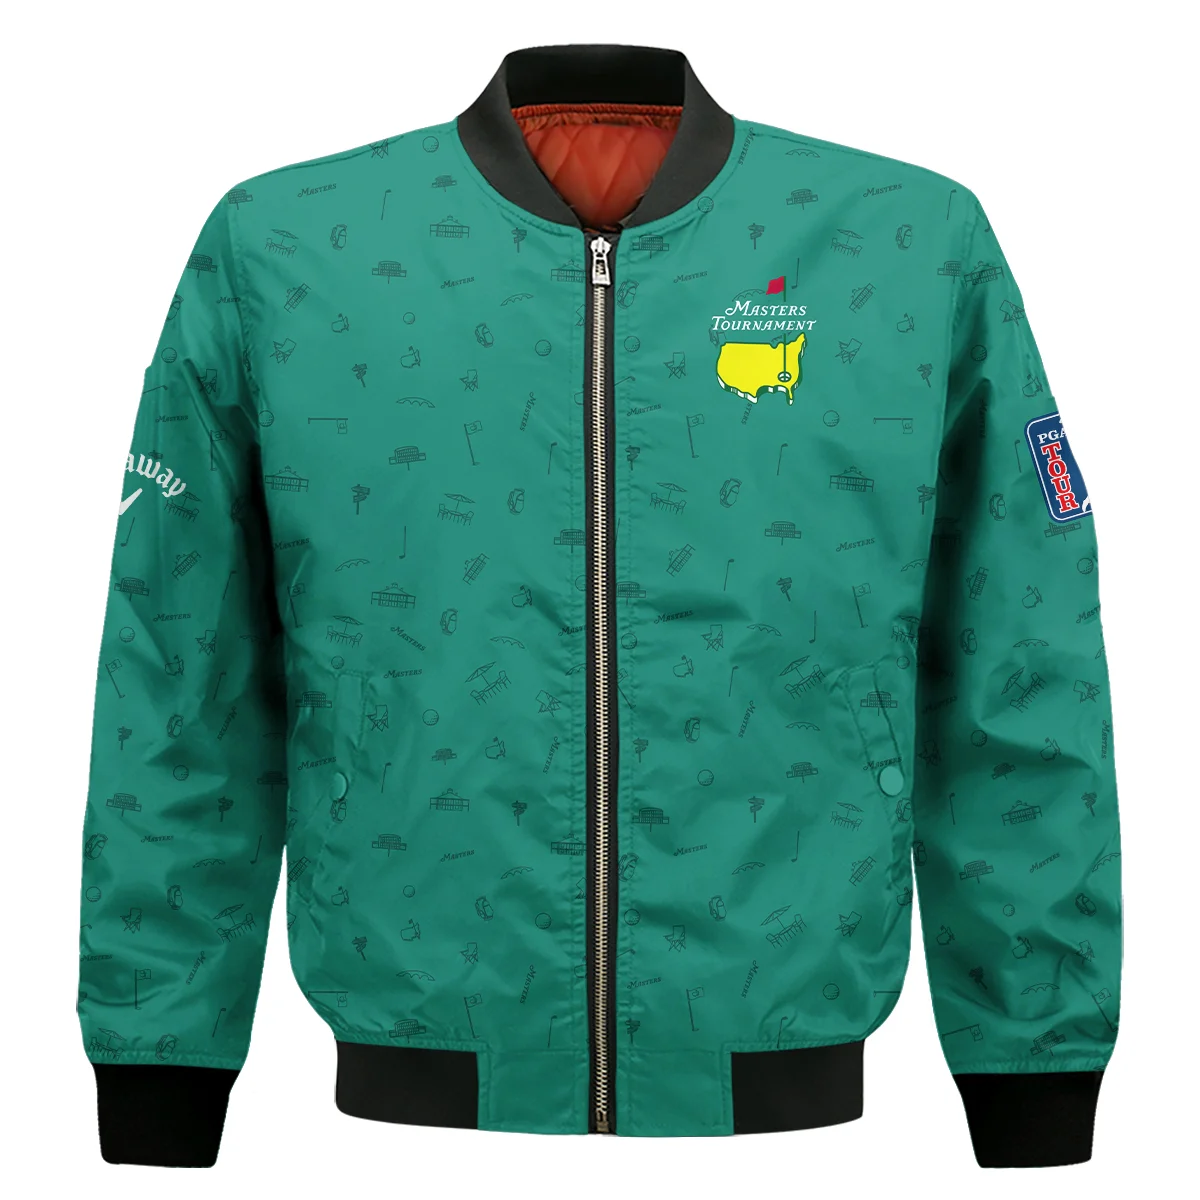 Golf Masters Tournament Callaway Bomber Jacket Augusta Icons Pattern Green Golf Sports Bomber Jacket GBJ1319